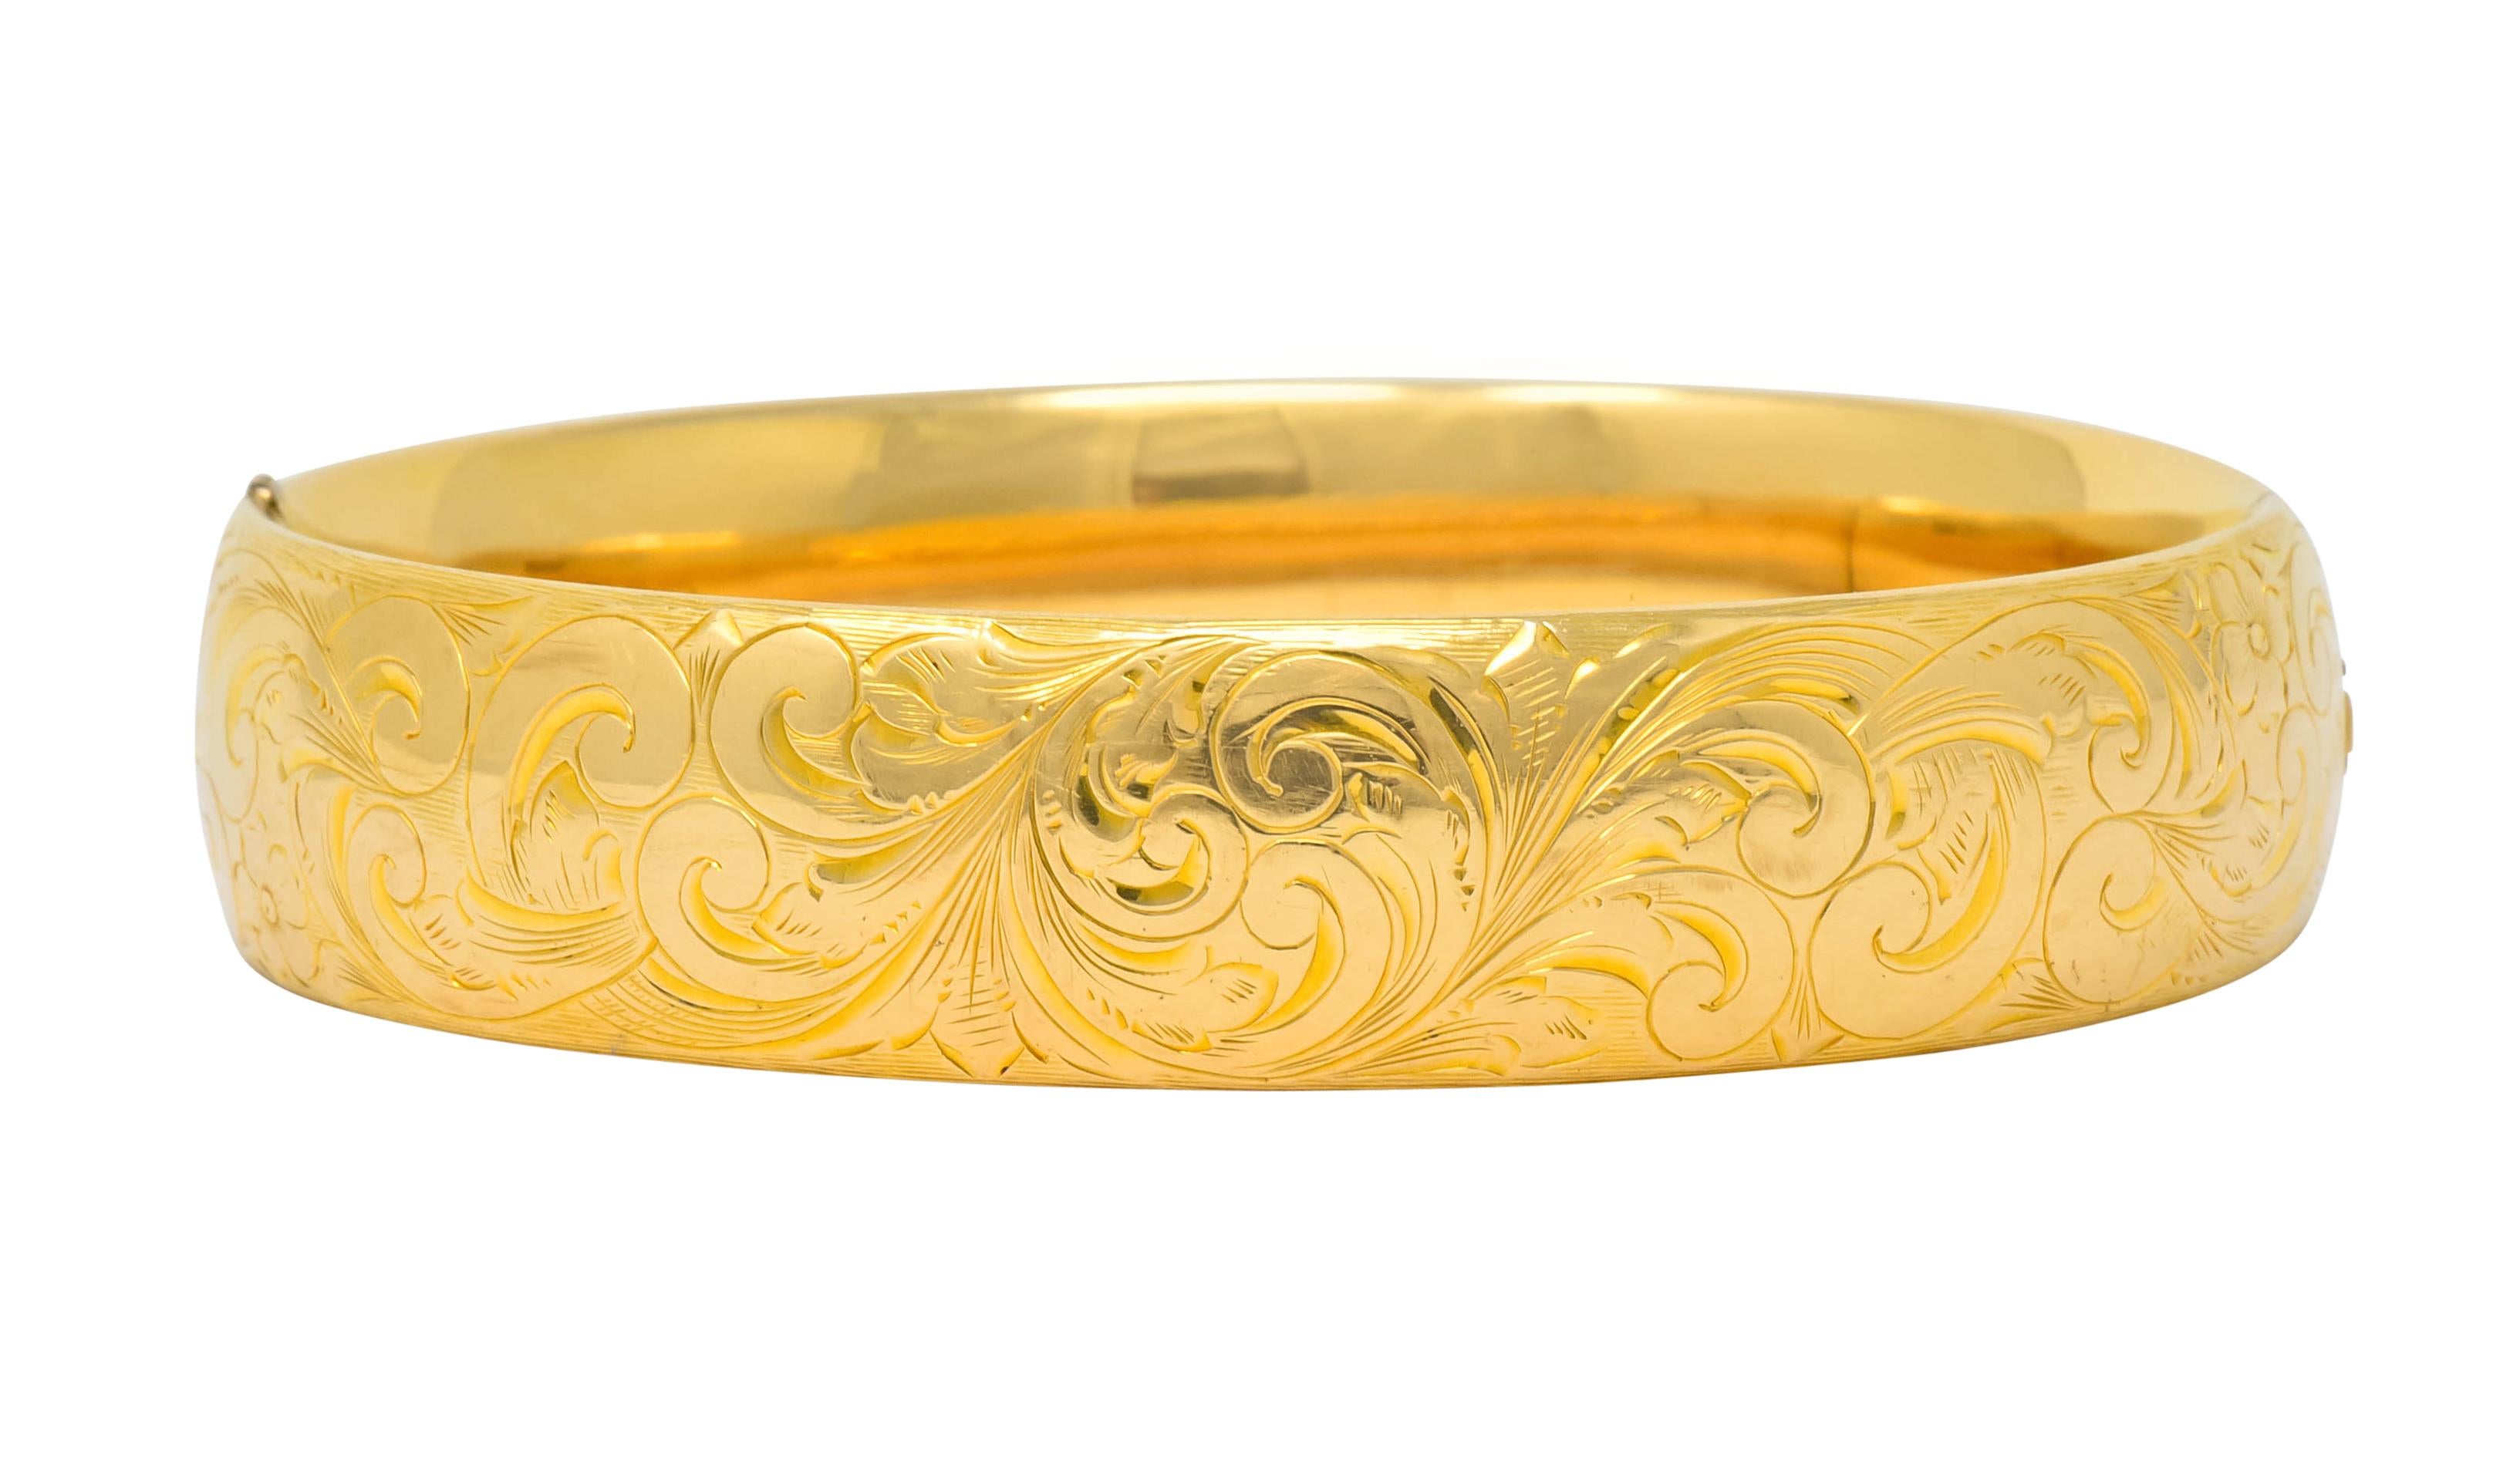 Bangle style bracelet deeply engraved throughout with scrolling foliate whiplash accented by floral motifs

Concealed clasp that opens on a hinge

With maker's mark and stamped 14k for 14 karat gold

Circa 1900

Inner circumference: 6 3/4